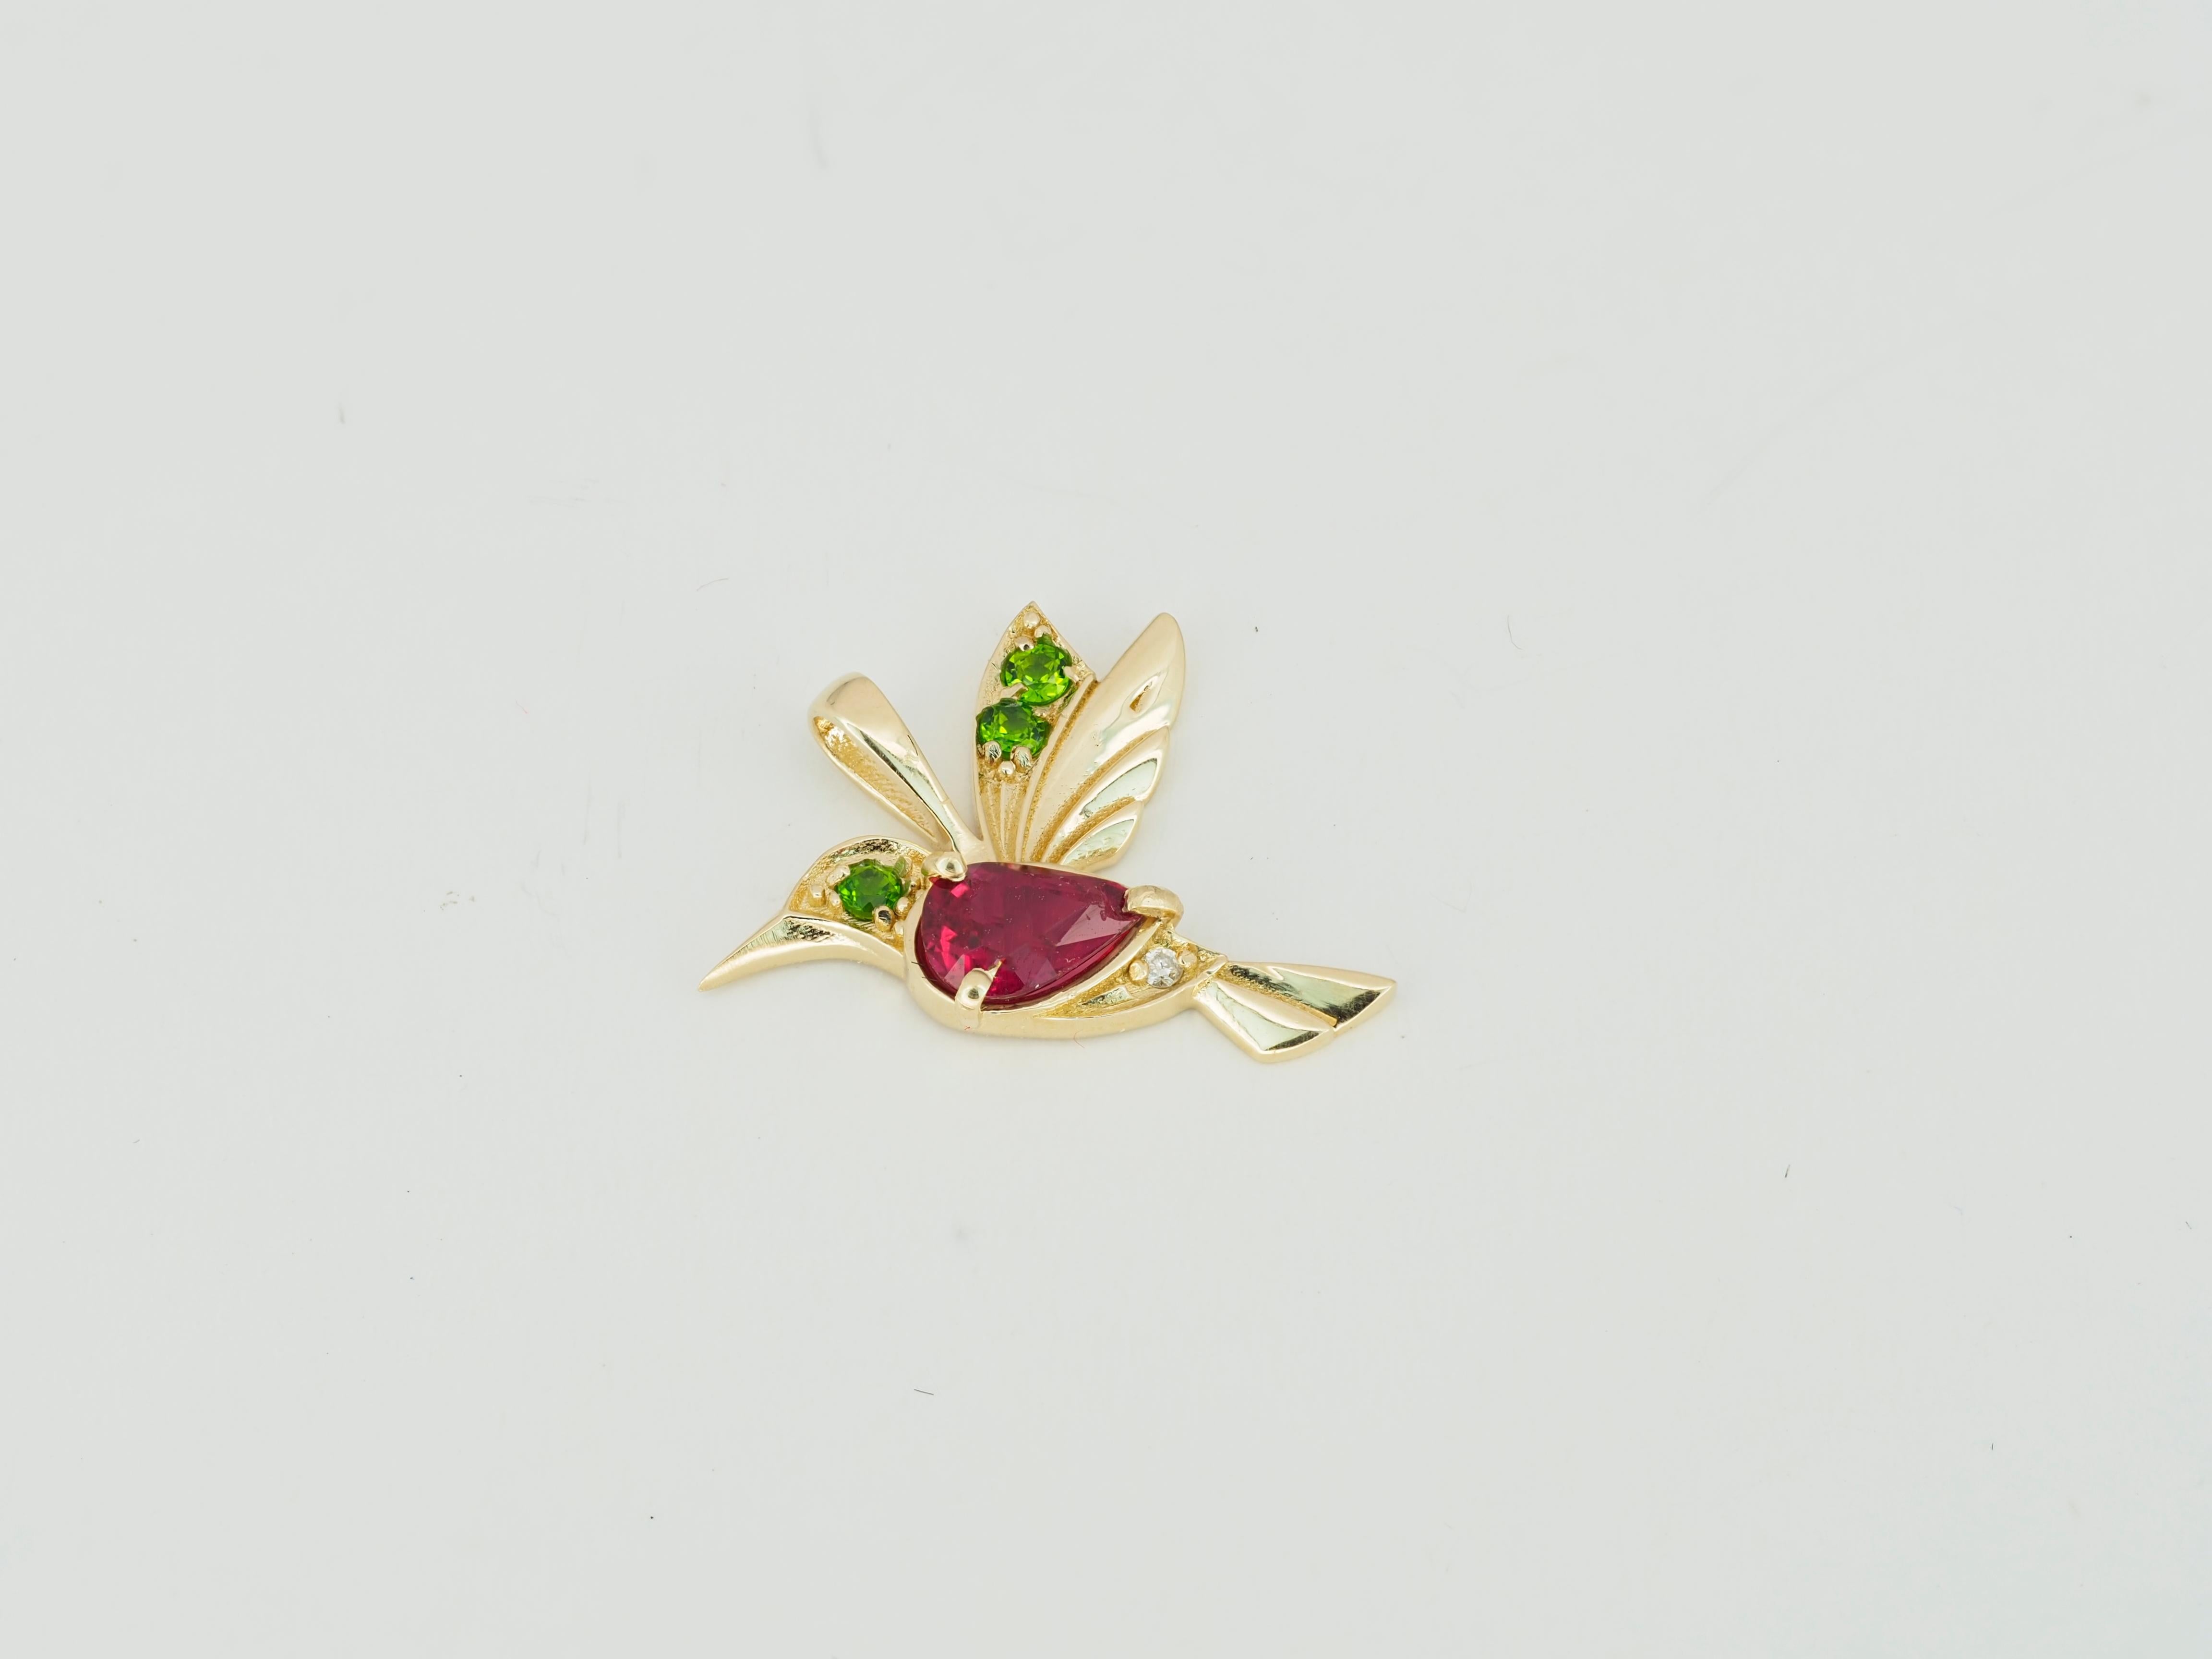 Women's 14k Gold Hummingbird Pendant with Rubies, Bird Pendant with Colored Gemstones! For Sale